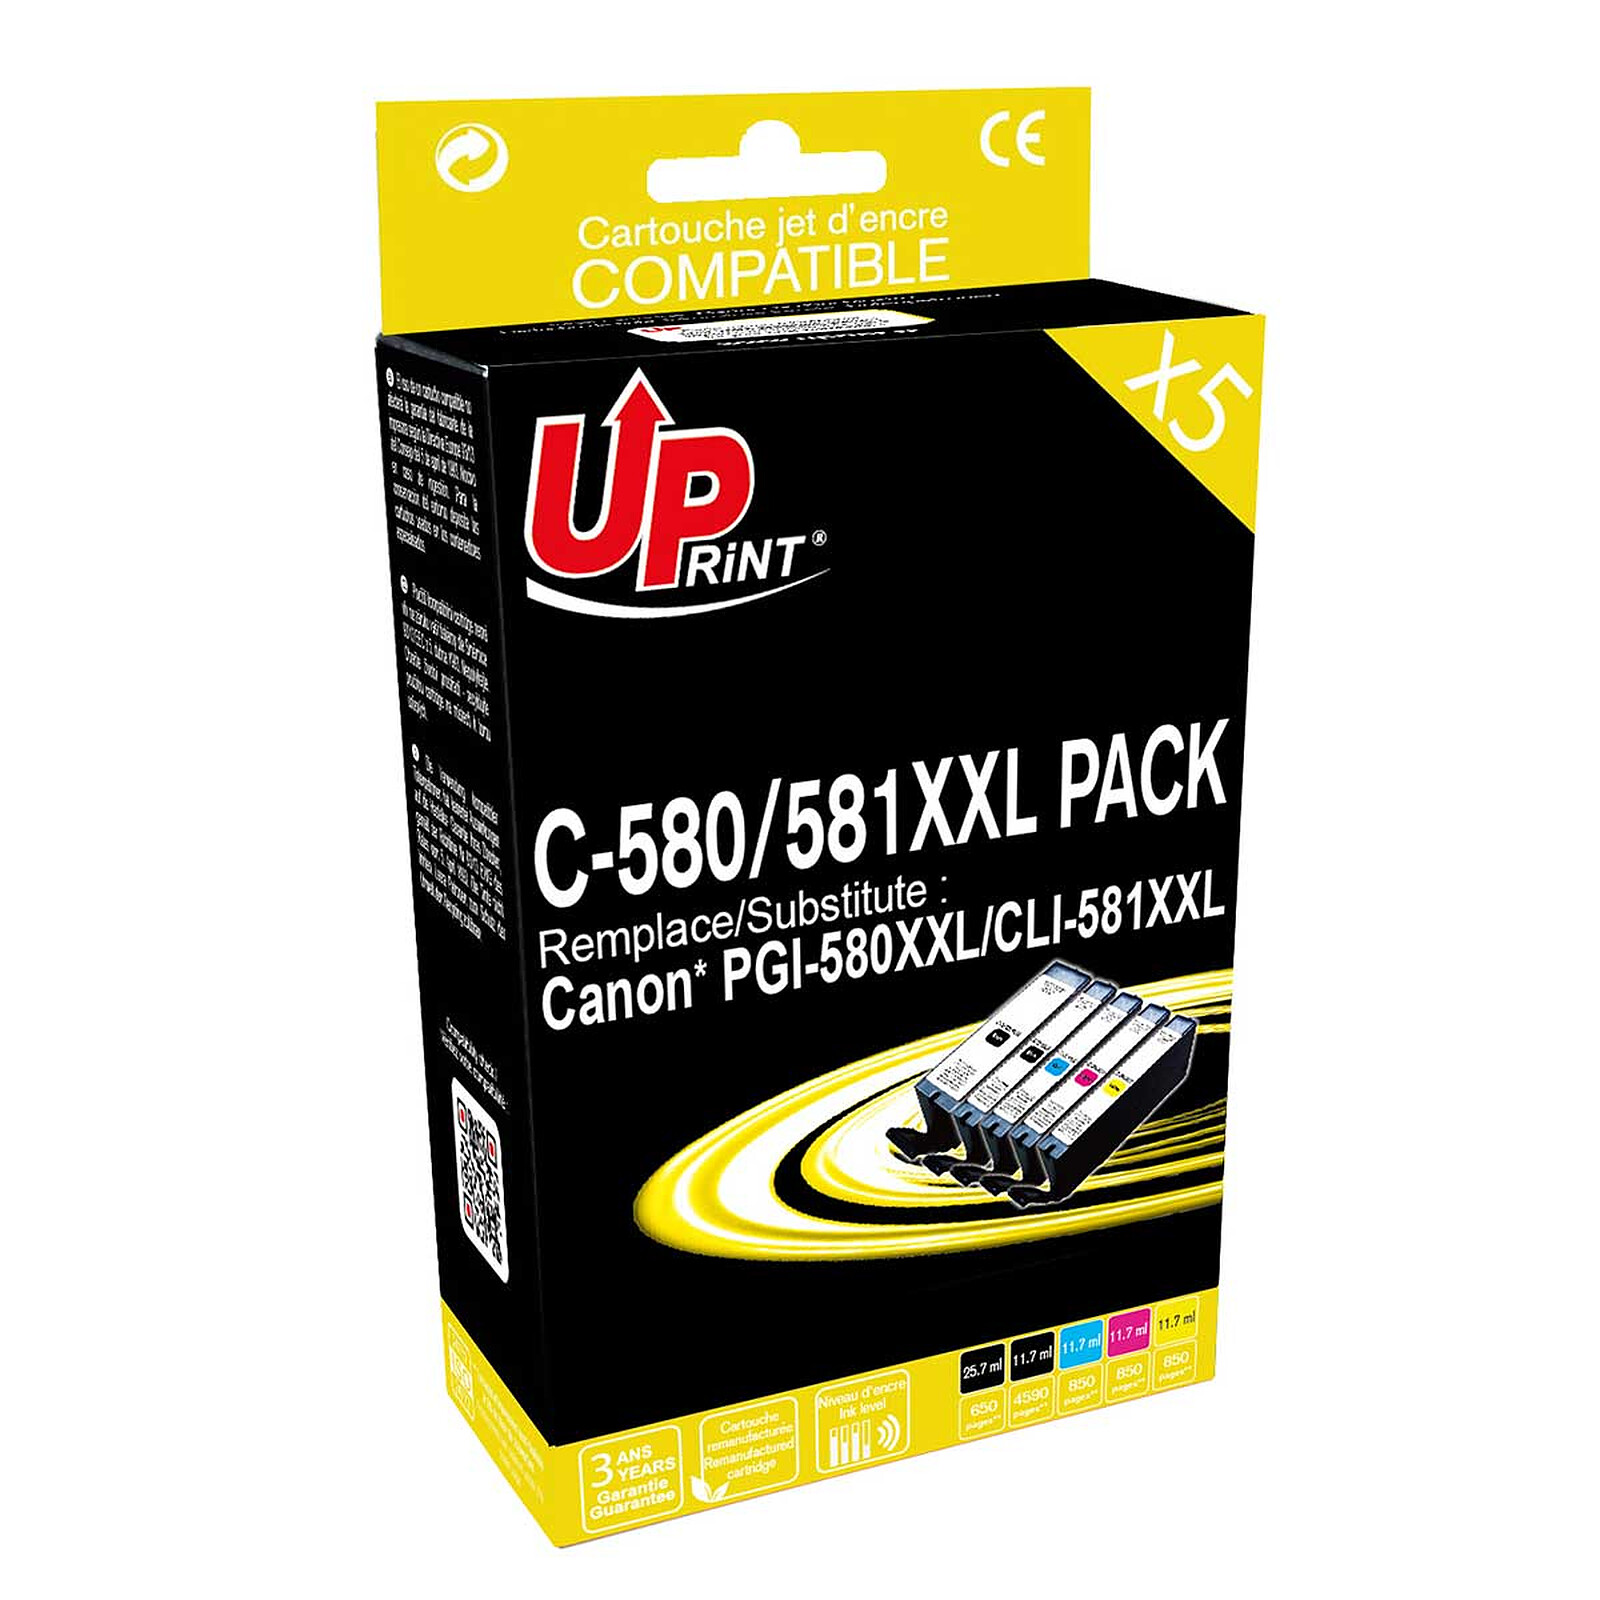 Cartouches d'encre - Pack 5 Cartouches compatibles Canon PGI-580 XXL et CLI-581  XXL - Consommables HP CANON BROTHER